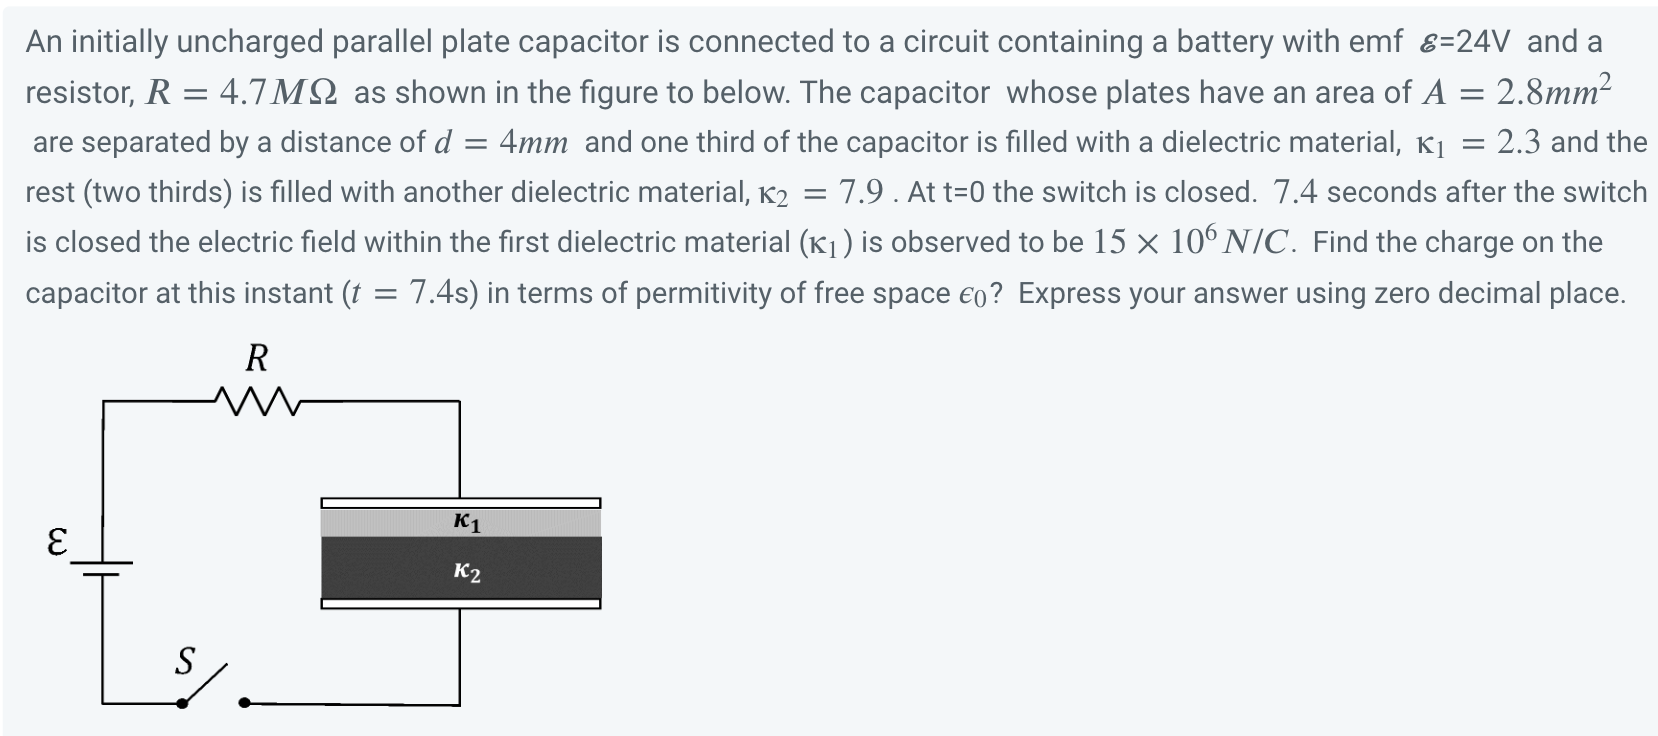 An initially uncharged parallel plate capacitor is connected to a circuit containing a battery with emf ε = 24 V and a resistor, R = 4.7 MΩ as shown in the figure to below. The capacitor whose plates have an area of A = 2.8 mm2 are separated by a distance of d = 4 mm and one third of the capacitor is filled with a dielectric material, κ1 = 2.3 and the rest (two thirds) is filled with another dielectric material, κ2 = 7.9. At t = 0 the switch is closed. 7.4 seconds after the switch is closed the electric field within the first dielectric material (κ1) is observed to be 15×106 N/C. Find the charge on the capacitor at this instant (t = 7.4 s) in terms of permittivity of free space ϵ0 ? Express your answer using zero decimal place.